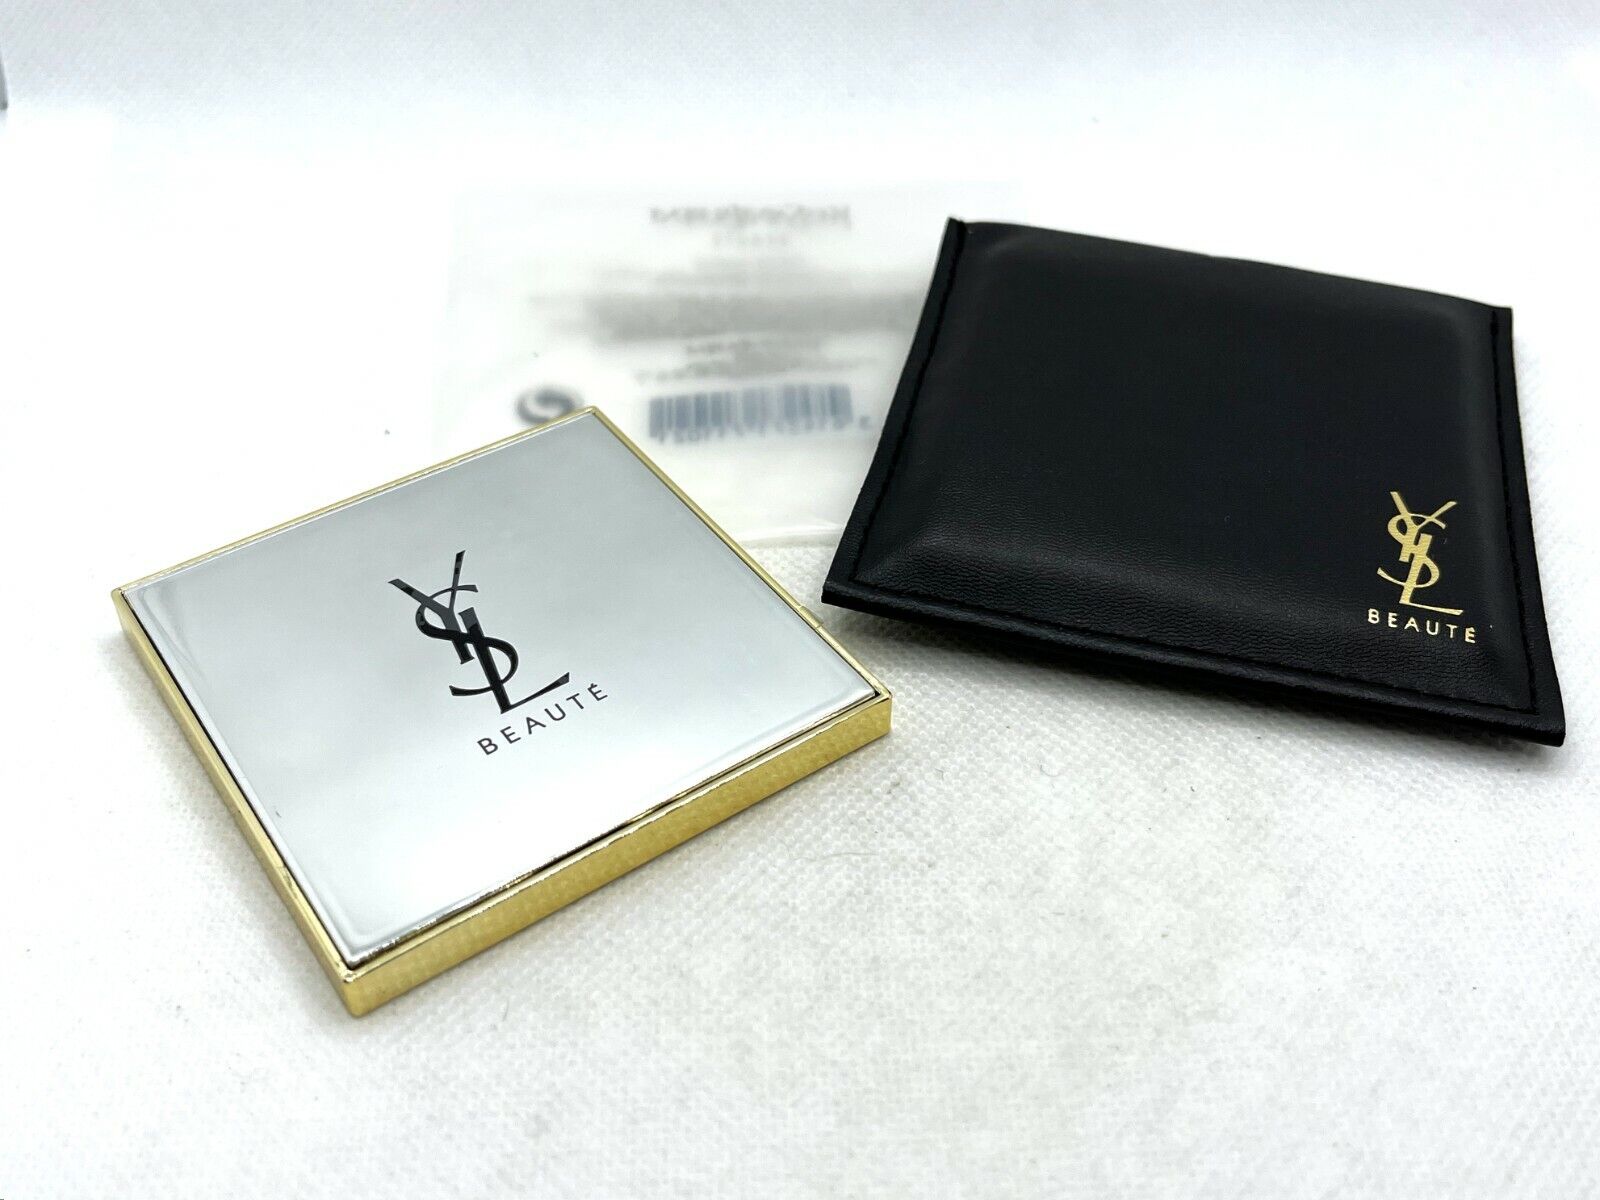 Auth YVES SAINT LAURENT YSL Beaute Novelty Hand Mirror w Faux Leather Sleeve